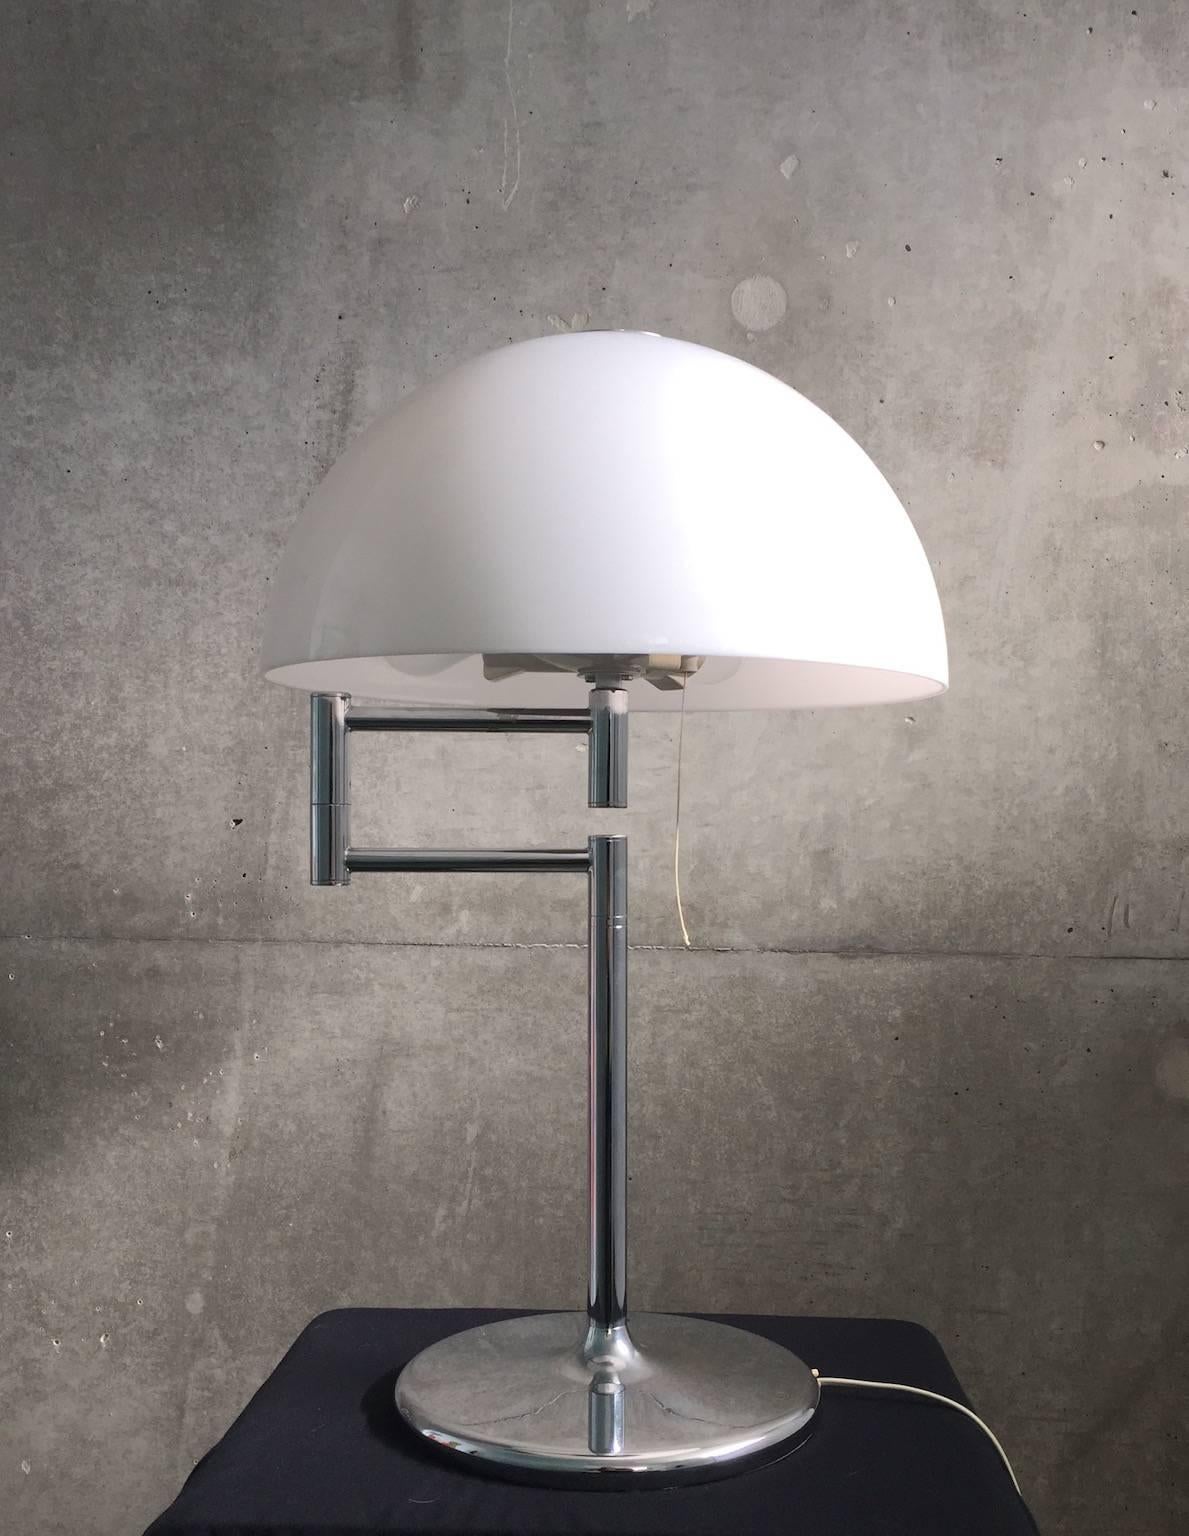 Classic Mid-Century Italian design lamp. 

Very high built quality with the weight of 16 kg/35lb 4.38oz. 

Contemporary modern piece.

Made of chrome lacquered steel with shade of thick white acrylic. 

Three bulbs 60 W Edison screw fitting